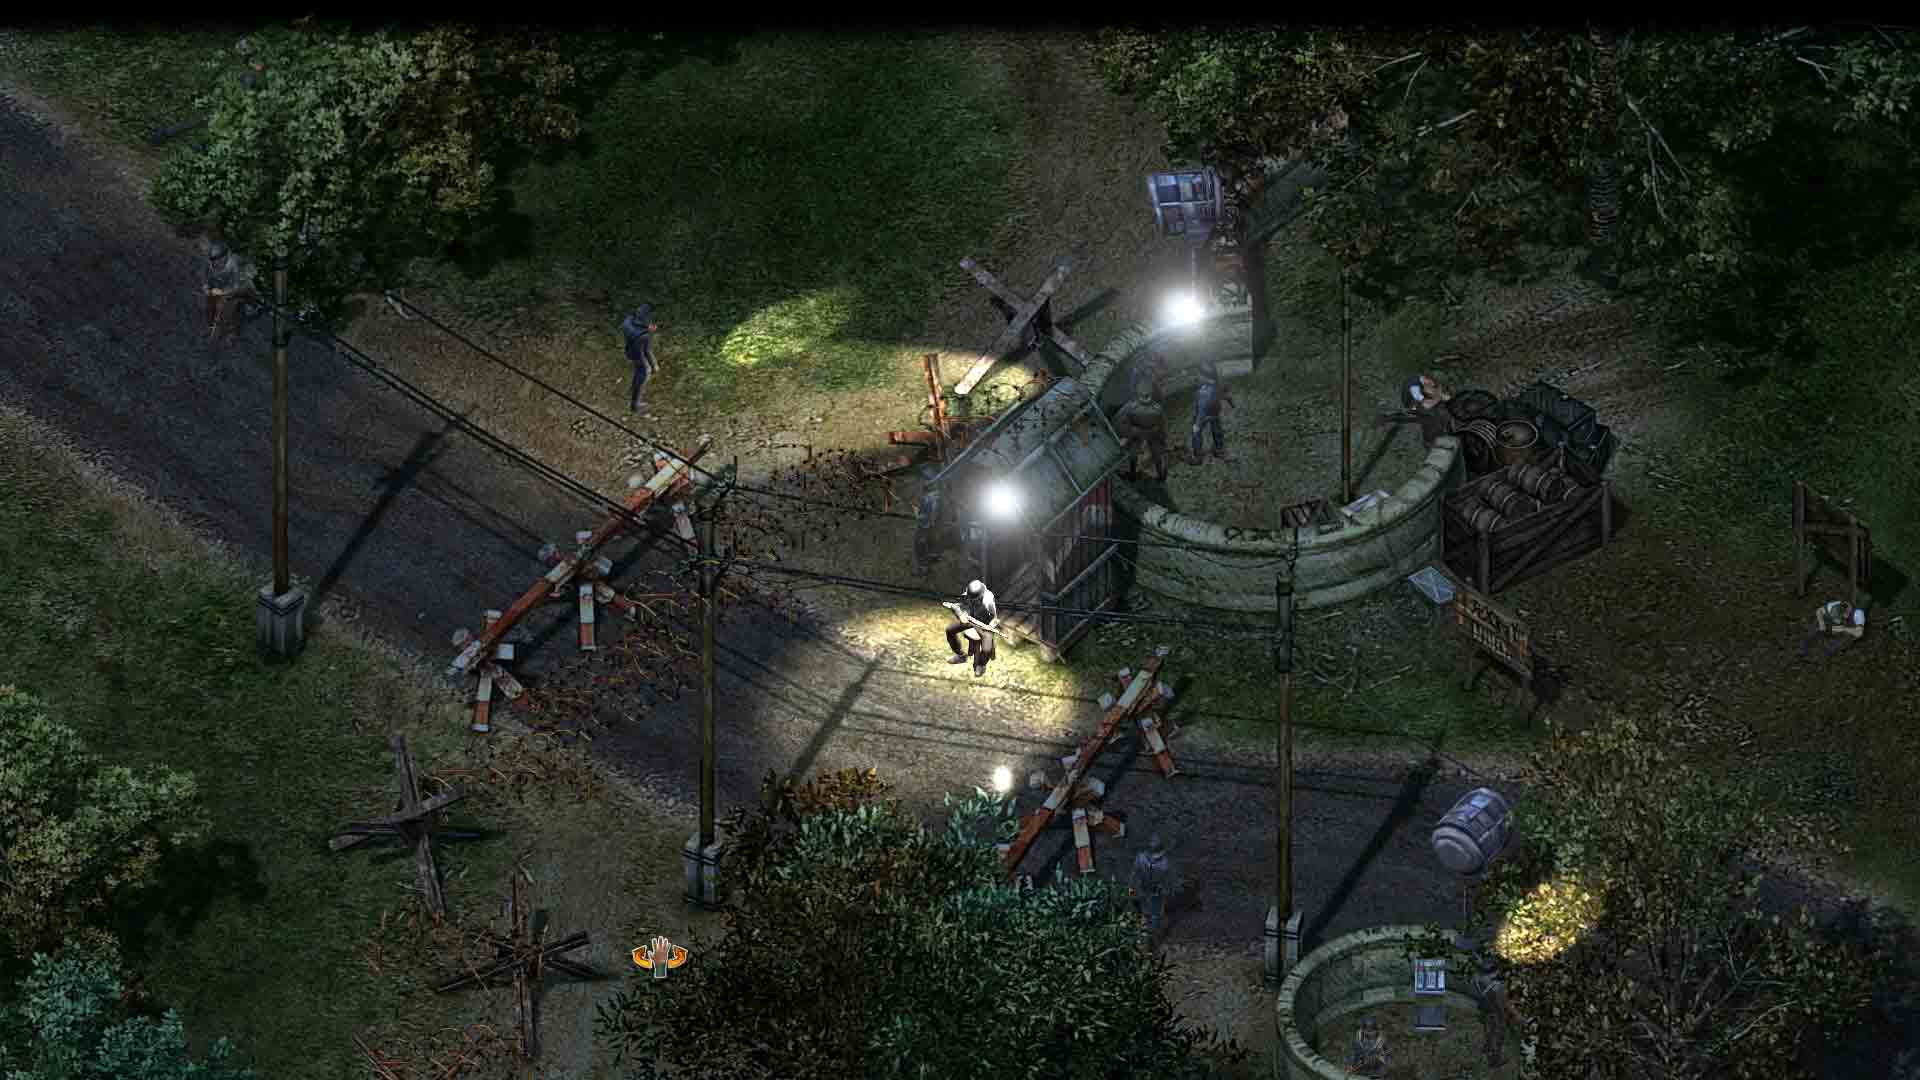 Commandos 3 - HD Remaster | DEMO instal the new version for apple